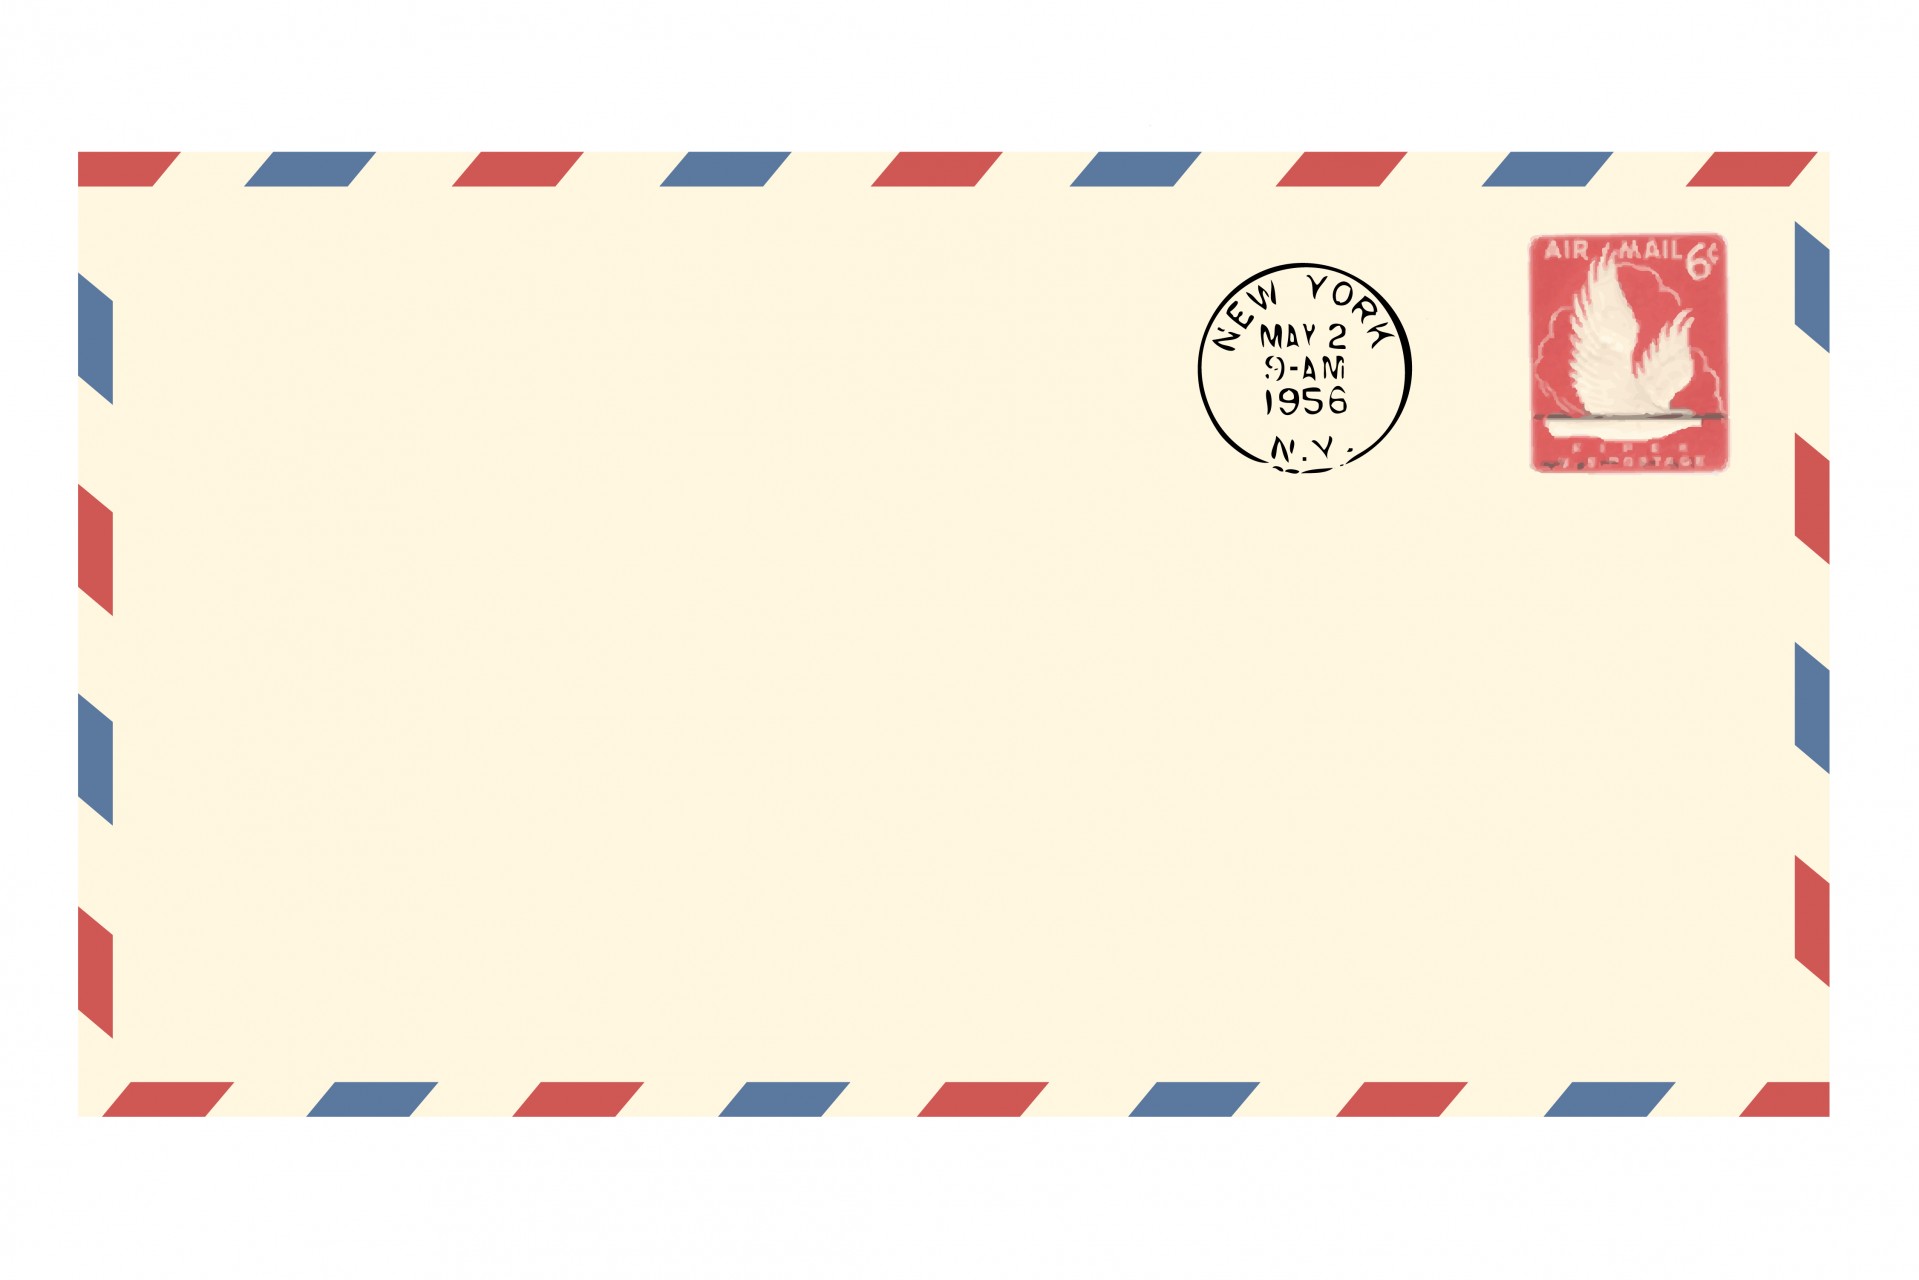 Vintage airmail envelope with postmark and postage stamp for scrapbooking